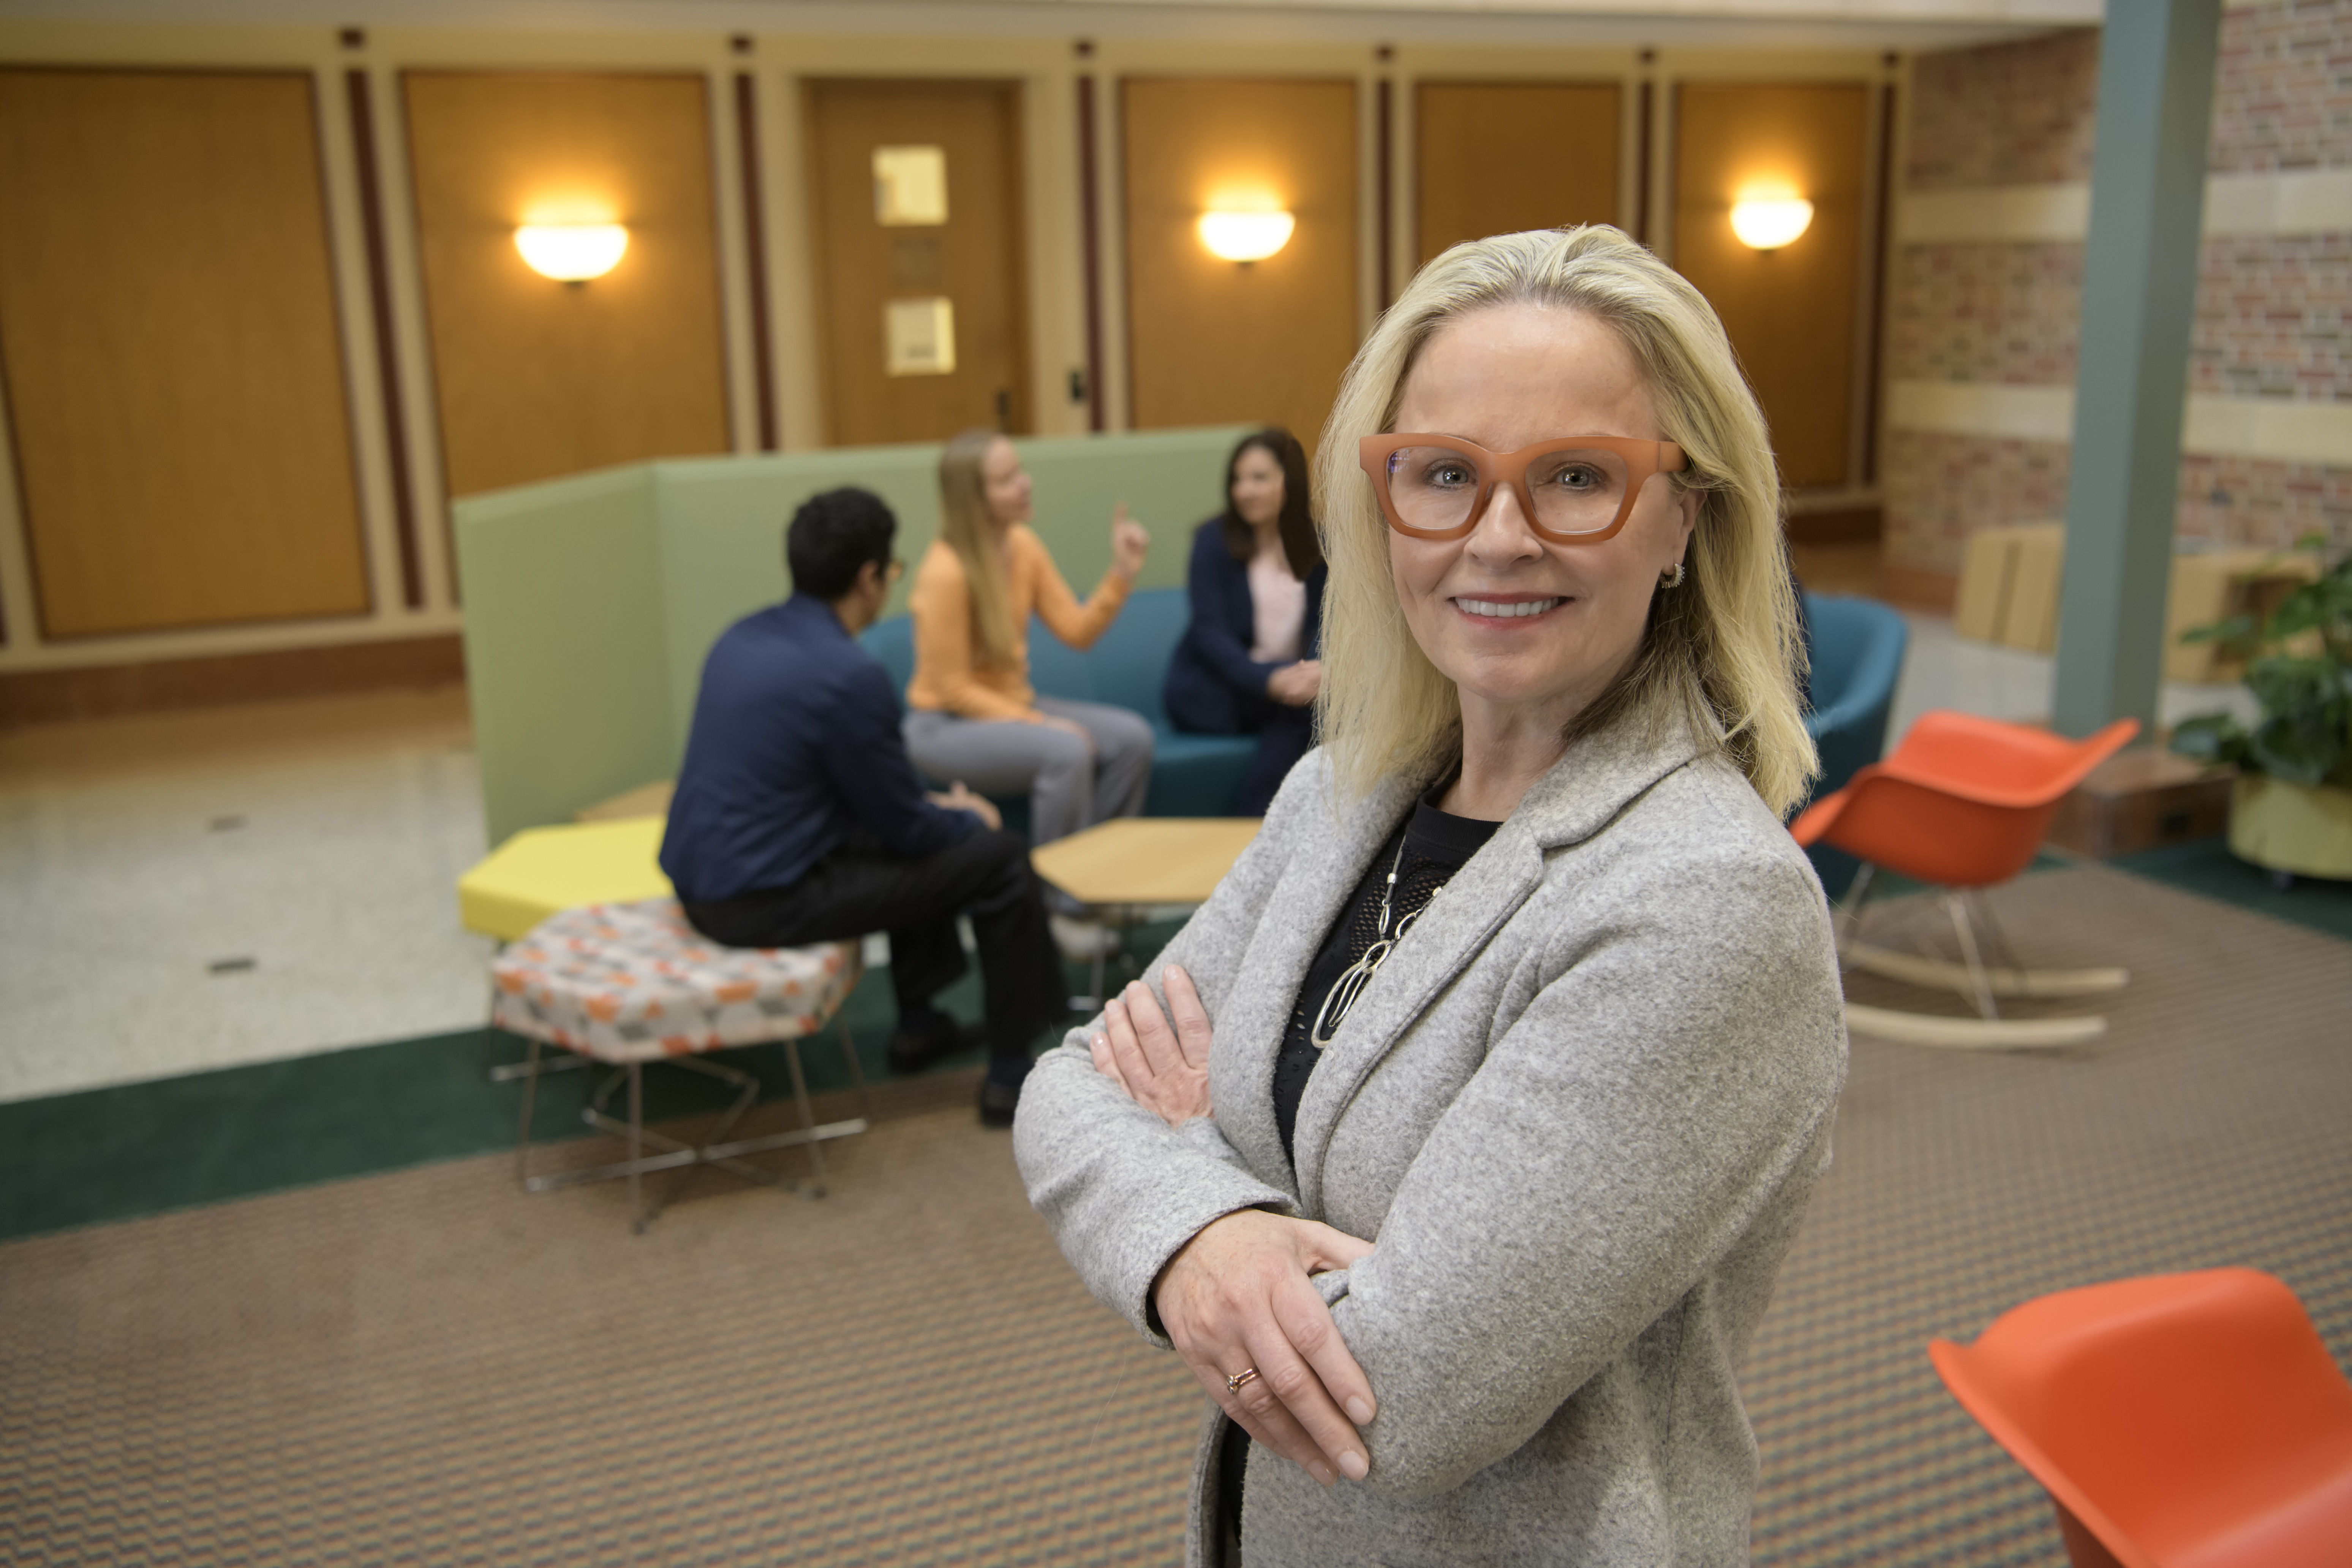 Deana McDonagh poses in the Beckman Atrium; behind her, members of the Beckman community enjoy the furniture she designed for the Beckman Atrium.